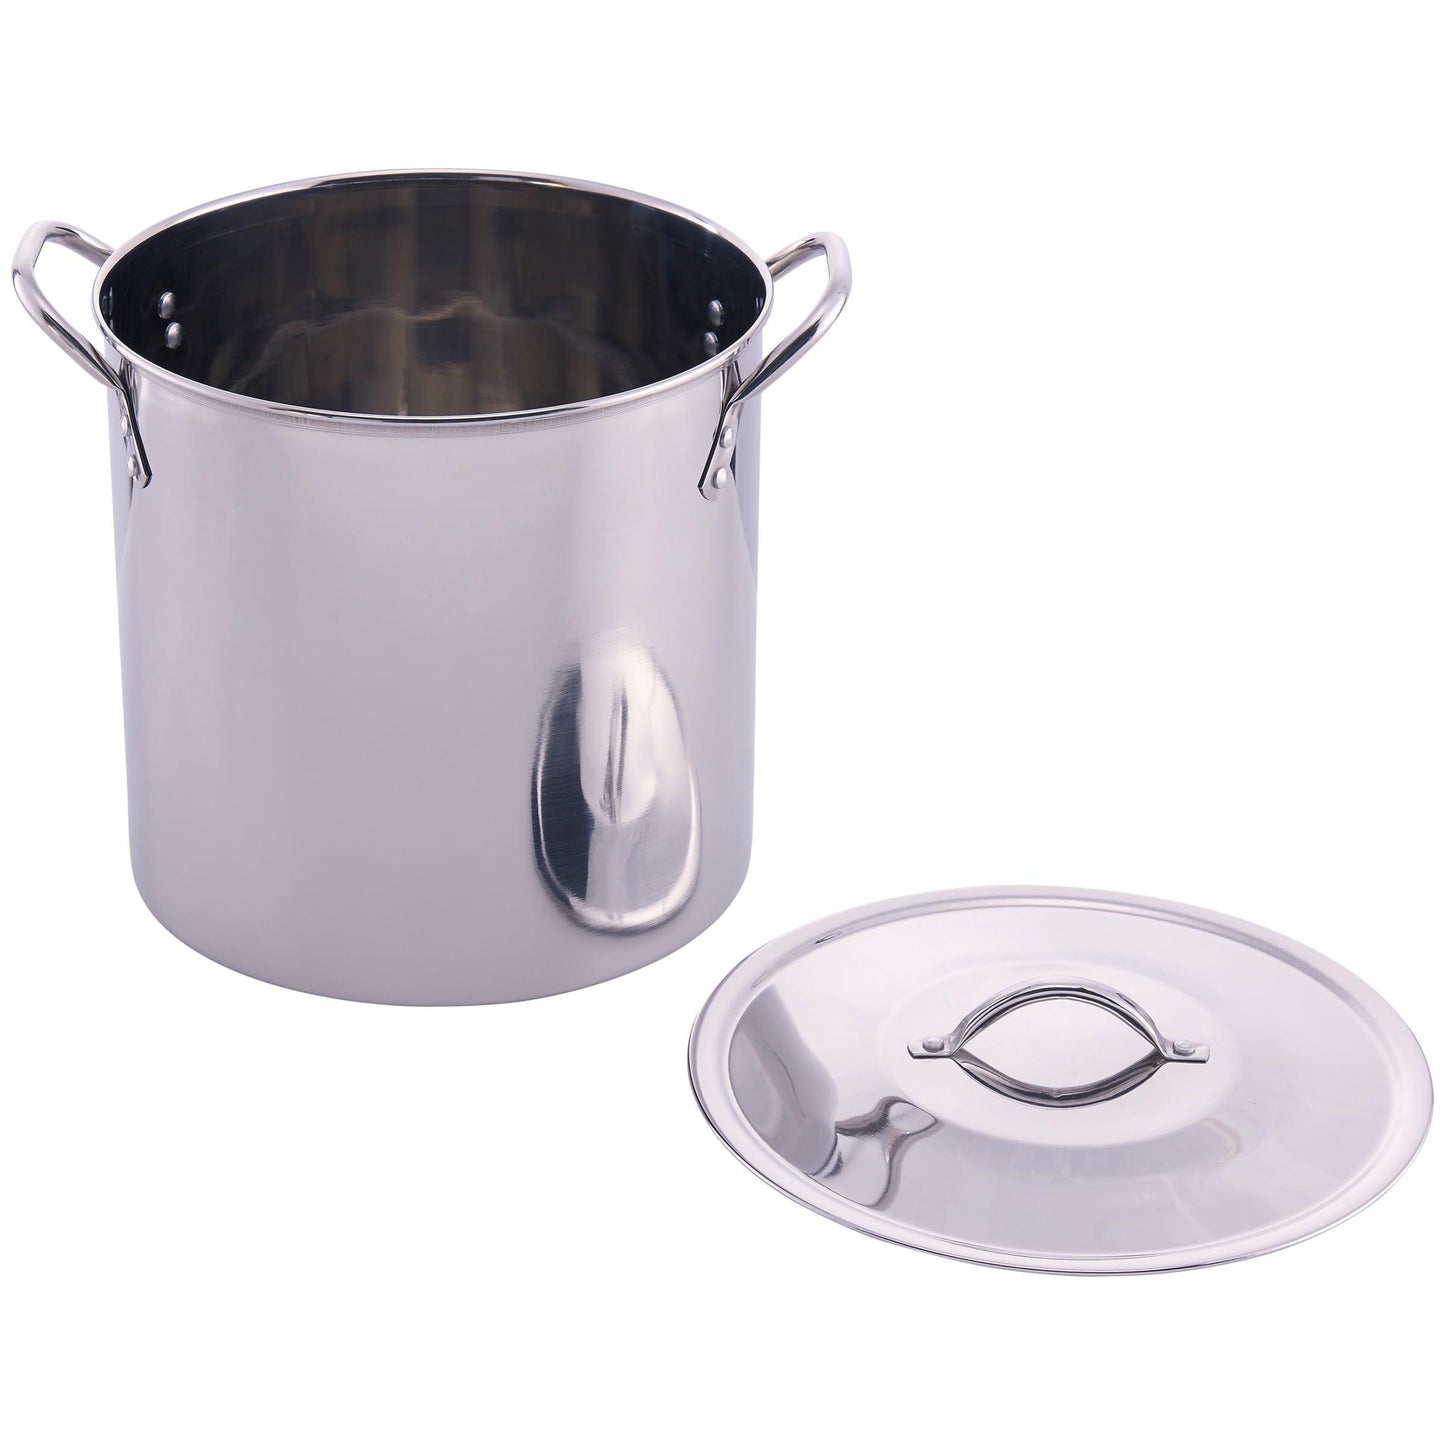 afeme 12-Qt Stainless Steel Stock Pot with Metal Lid - CookCave